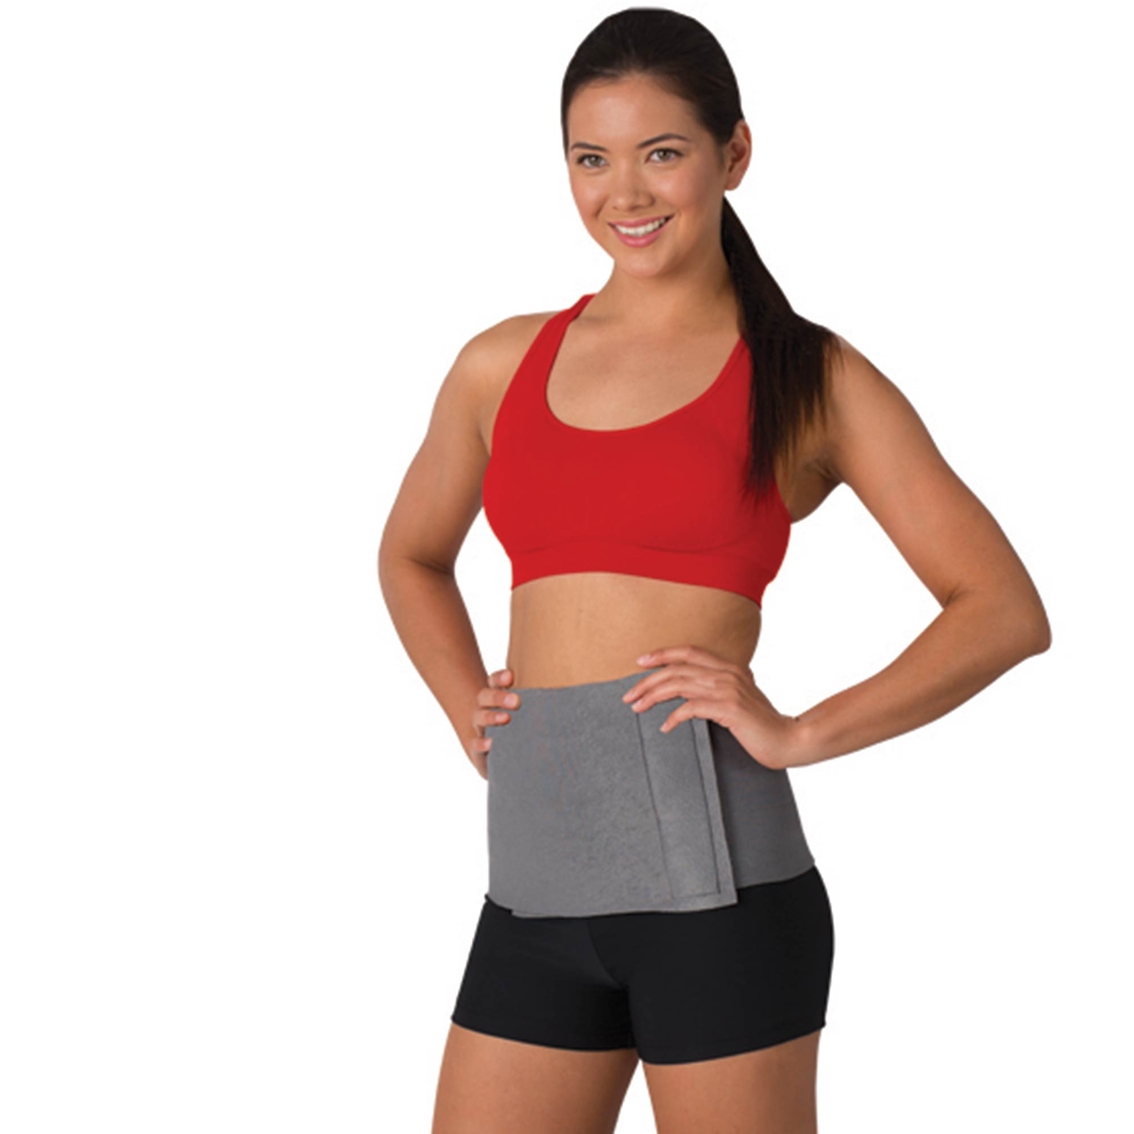 bally total fitness slimmer belt with magnets reviews